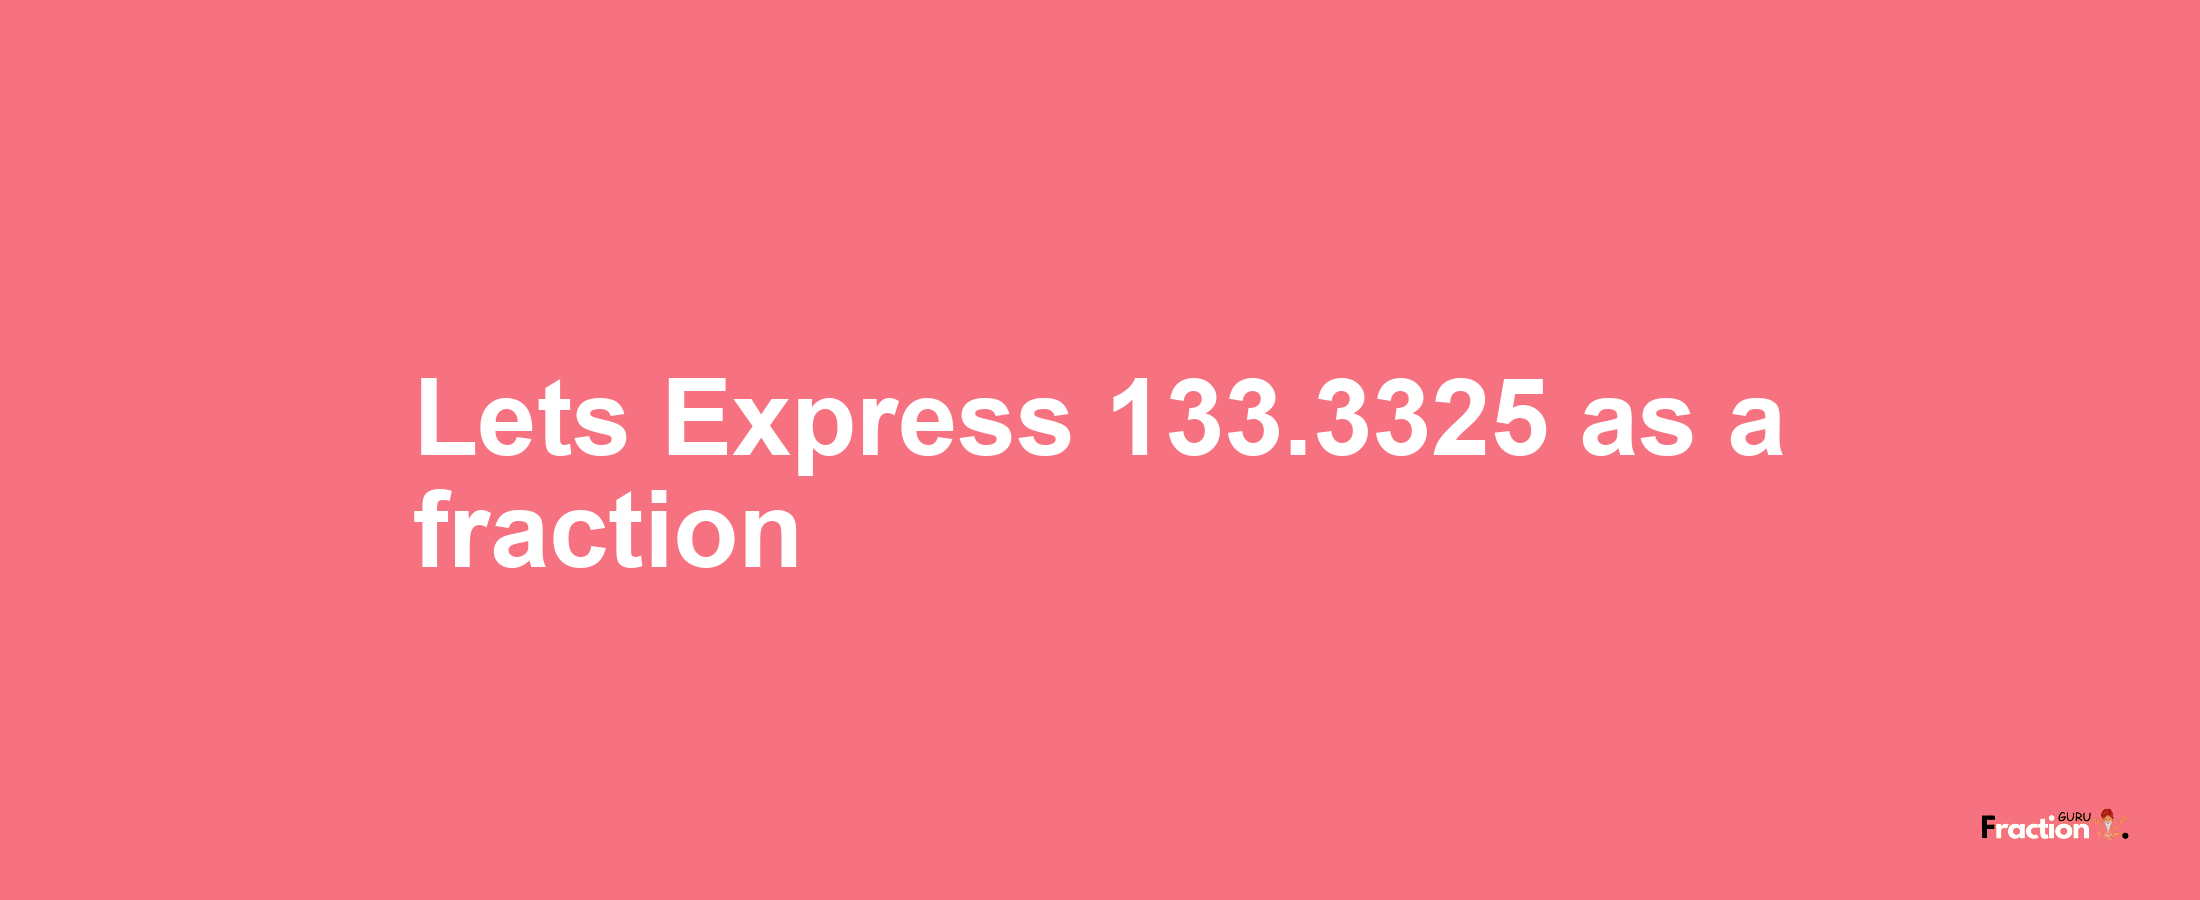 Lets Express 133.3325 as afraction